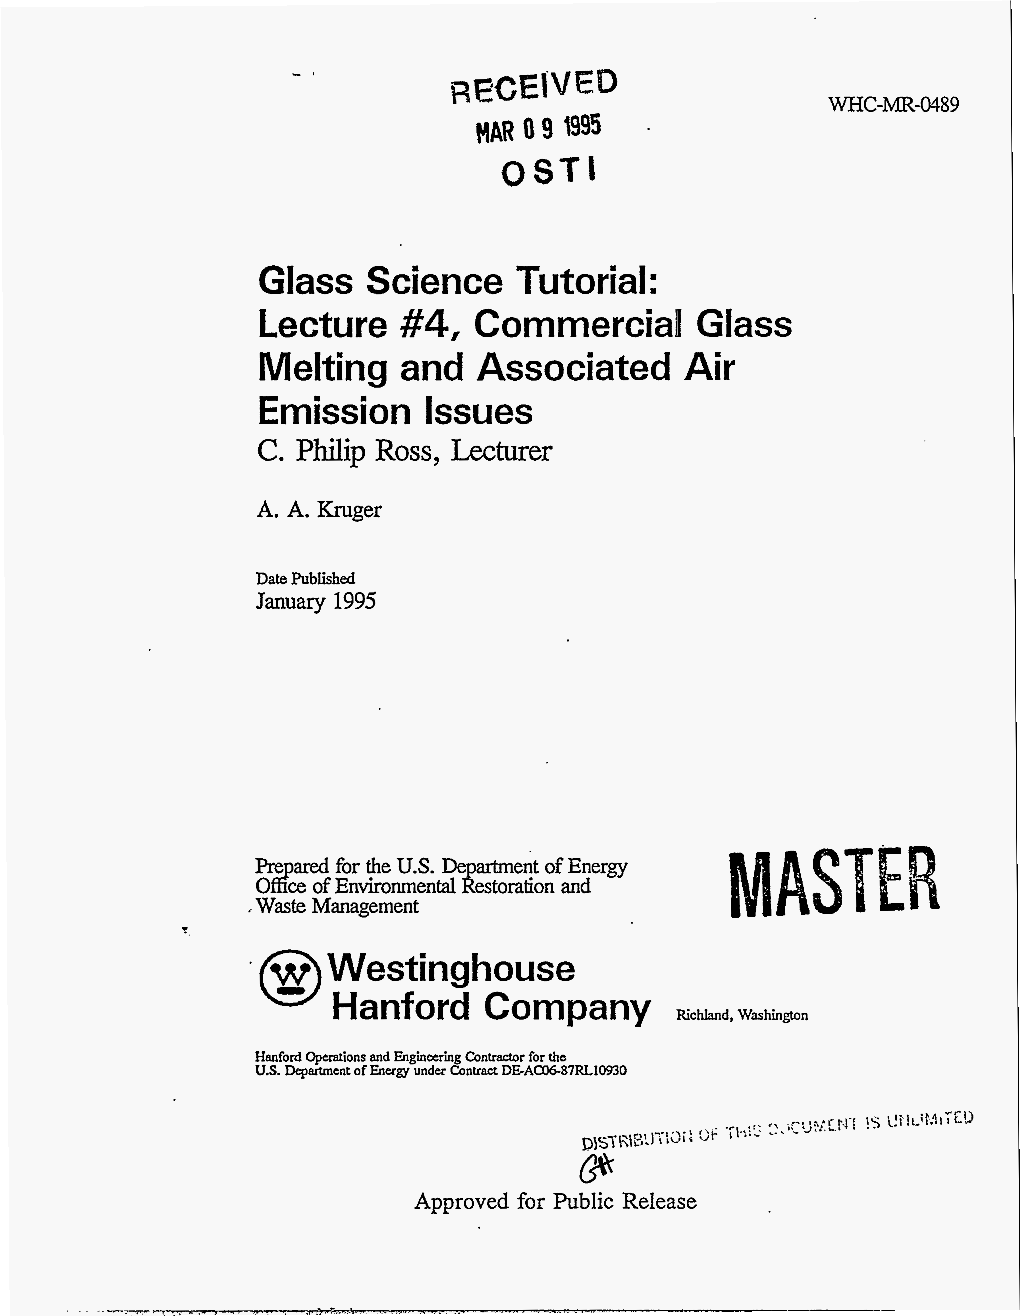 Lecture #4, Commerciail Glass Melting and Associated Air Emission Issues C